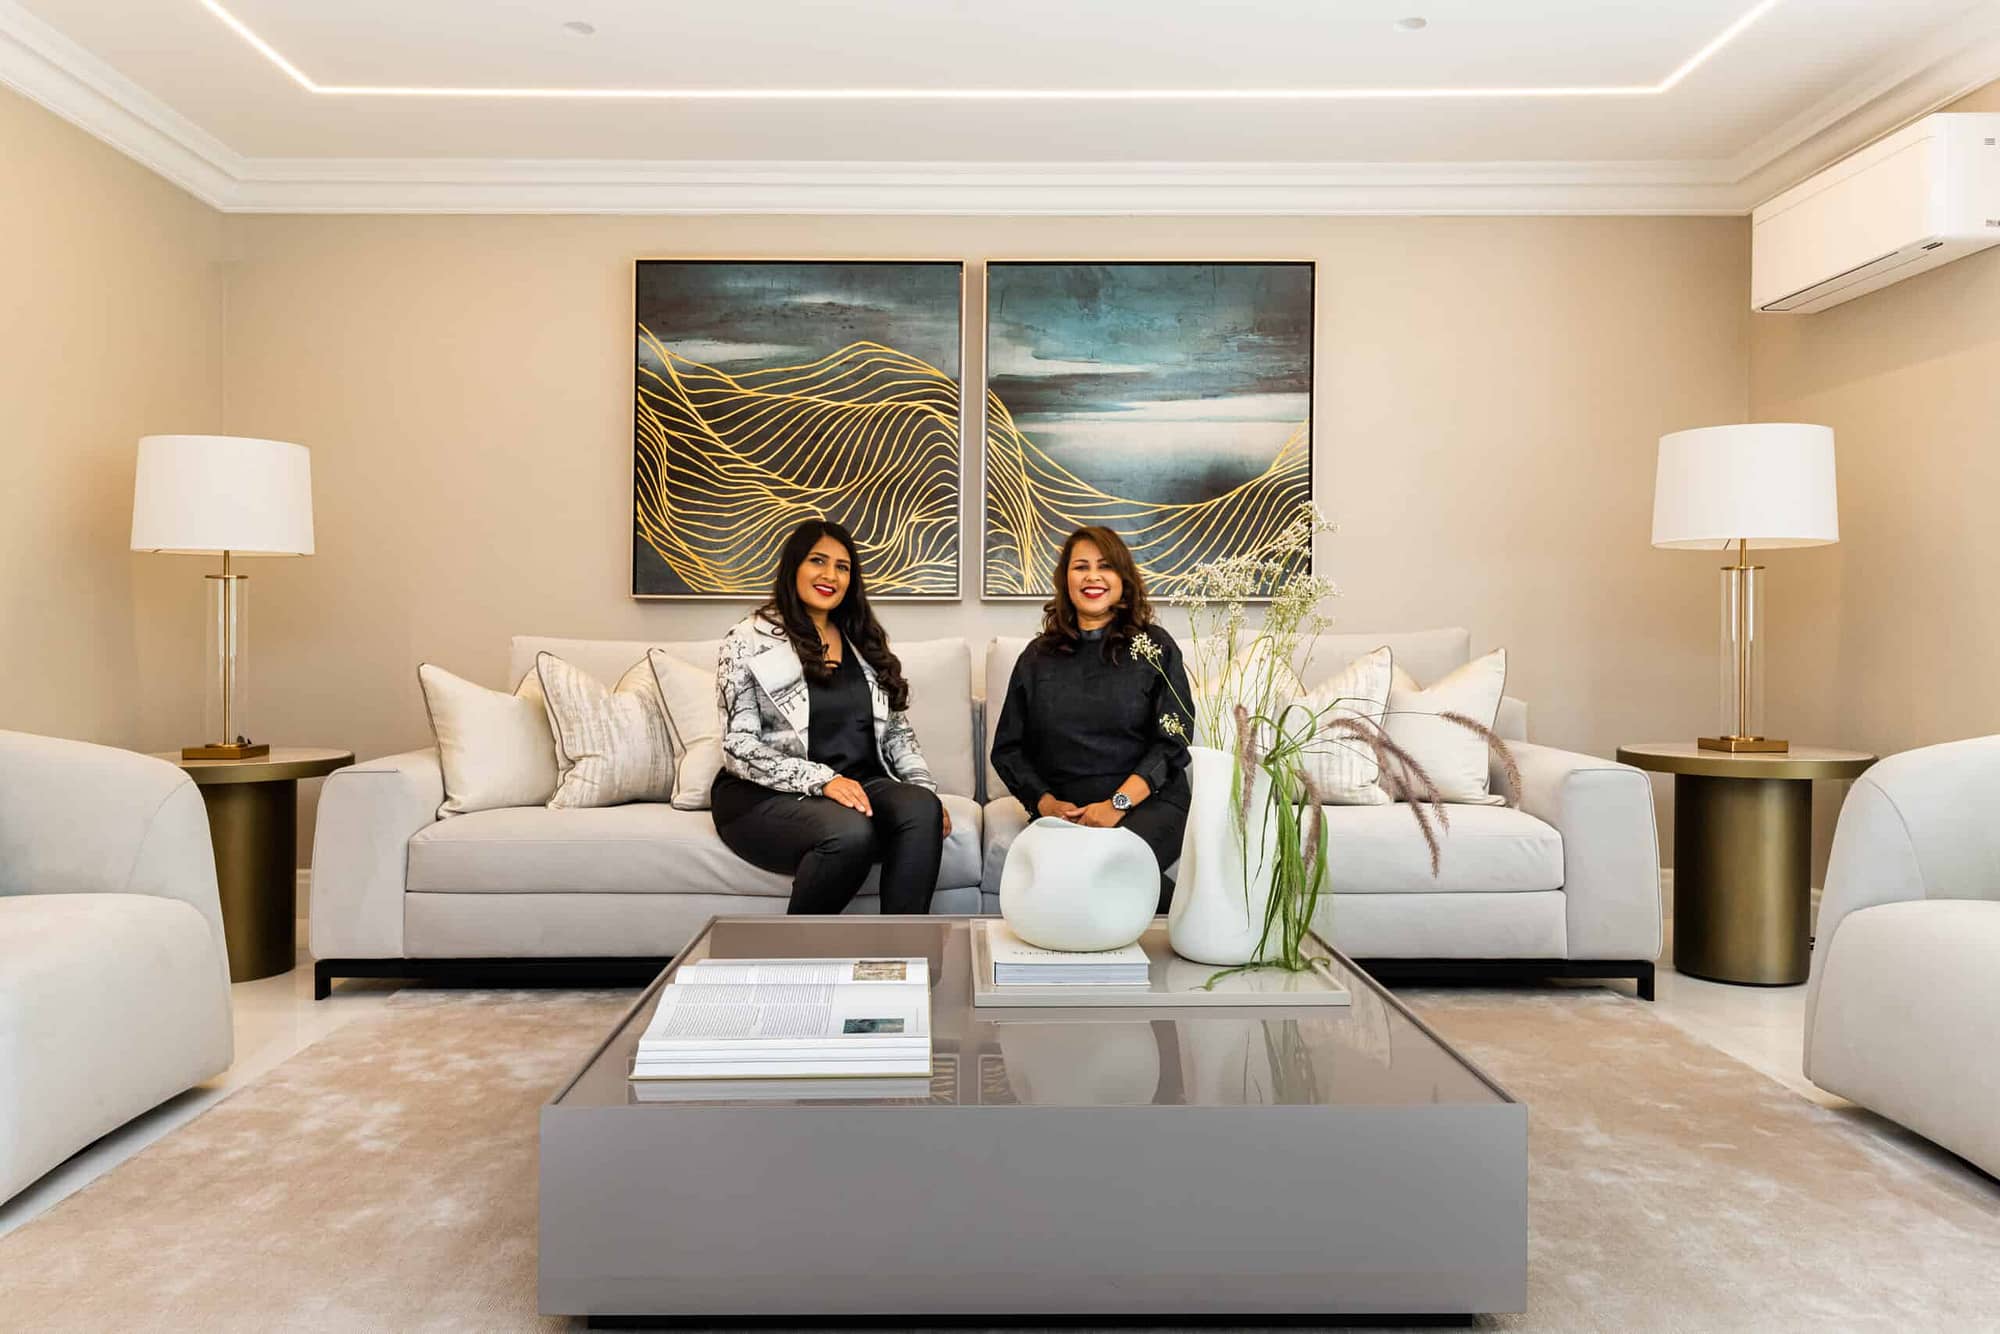 Vandana and Megha, our Interior Designers in Potters Bar